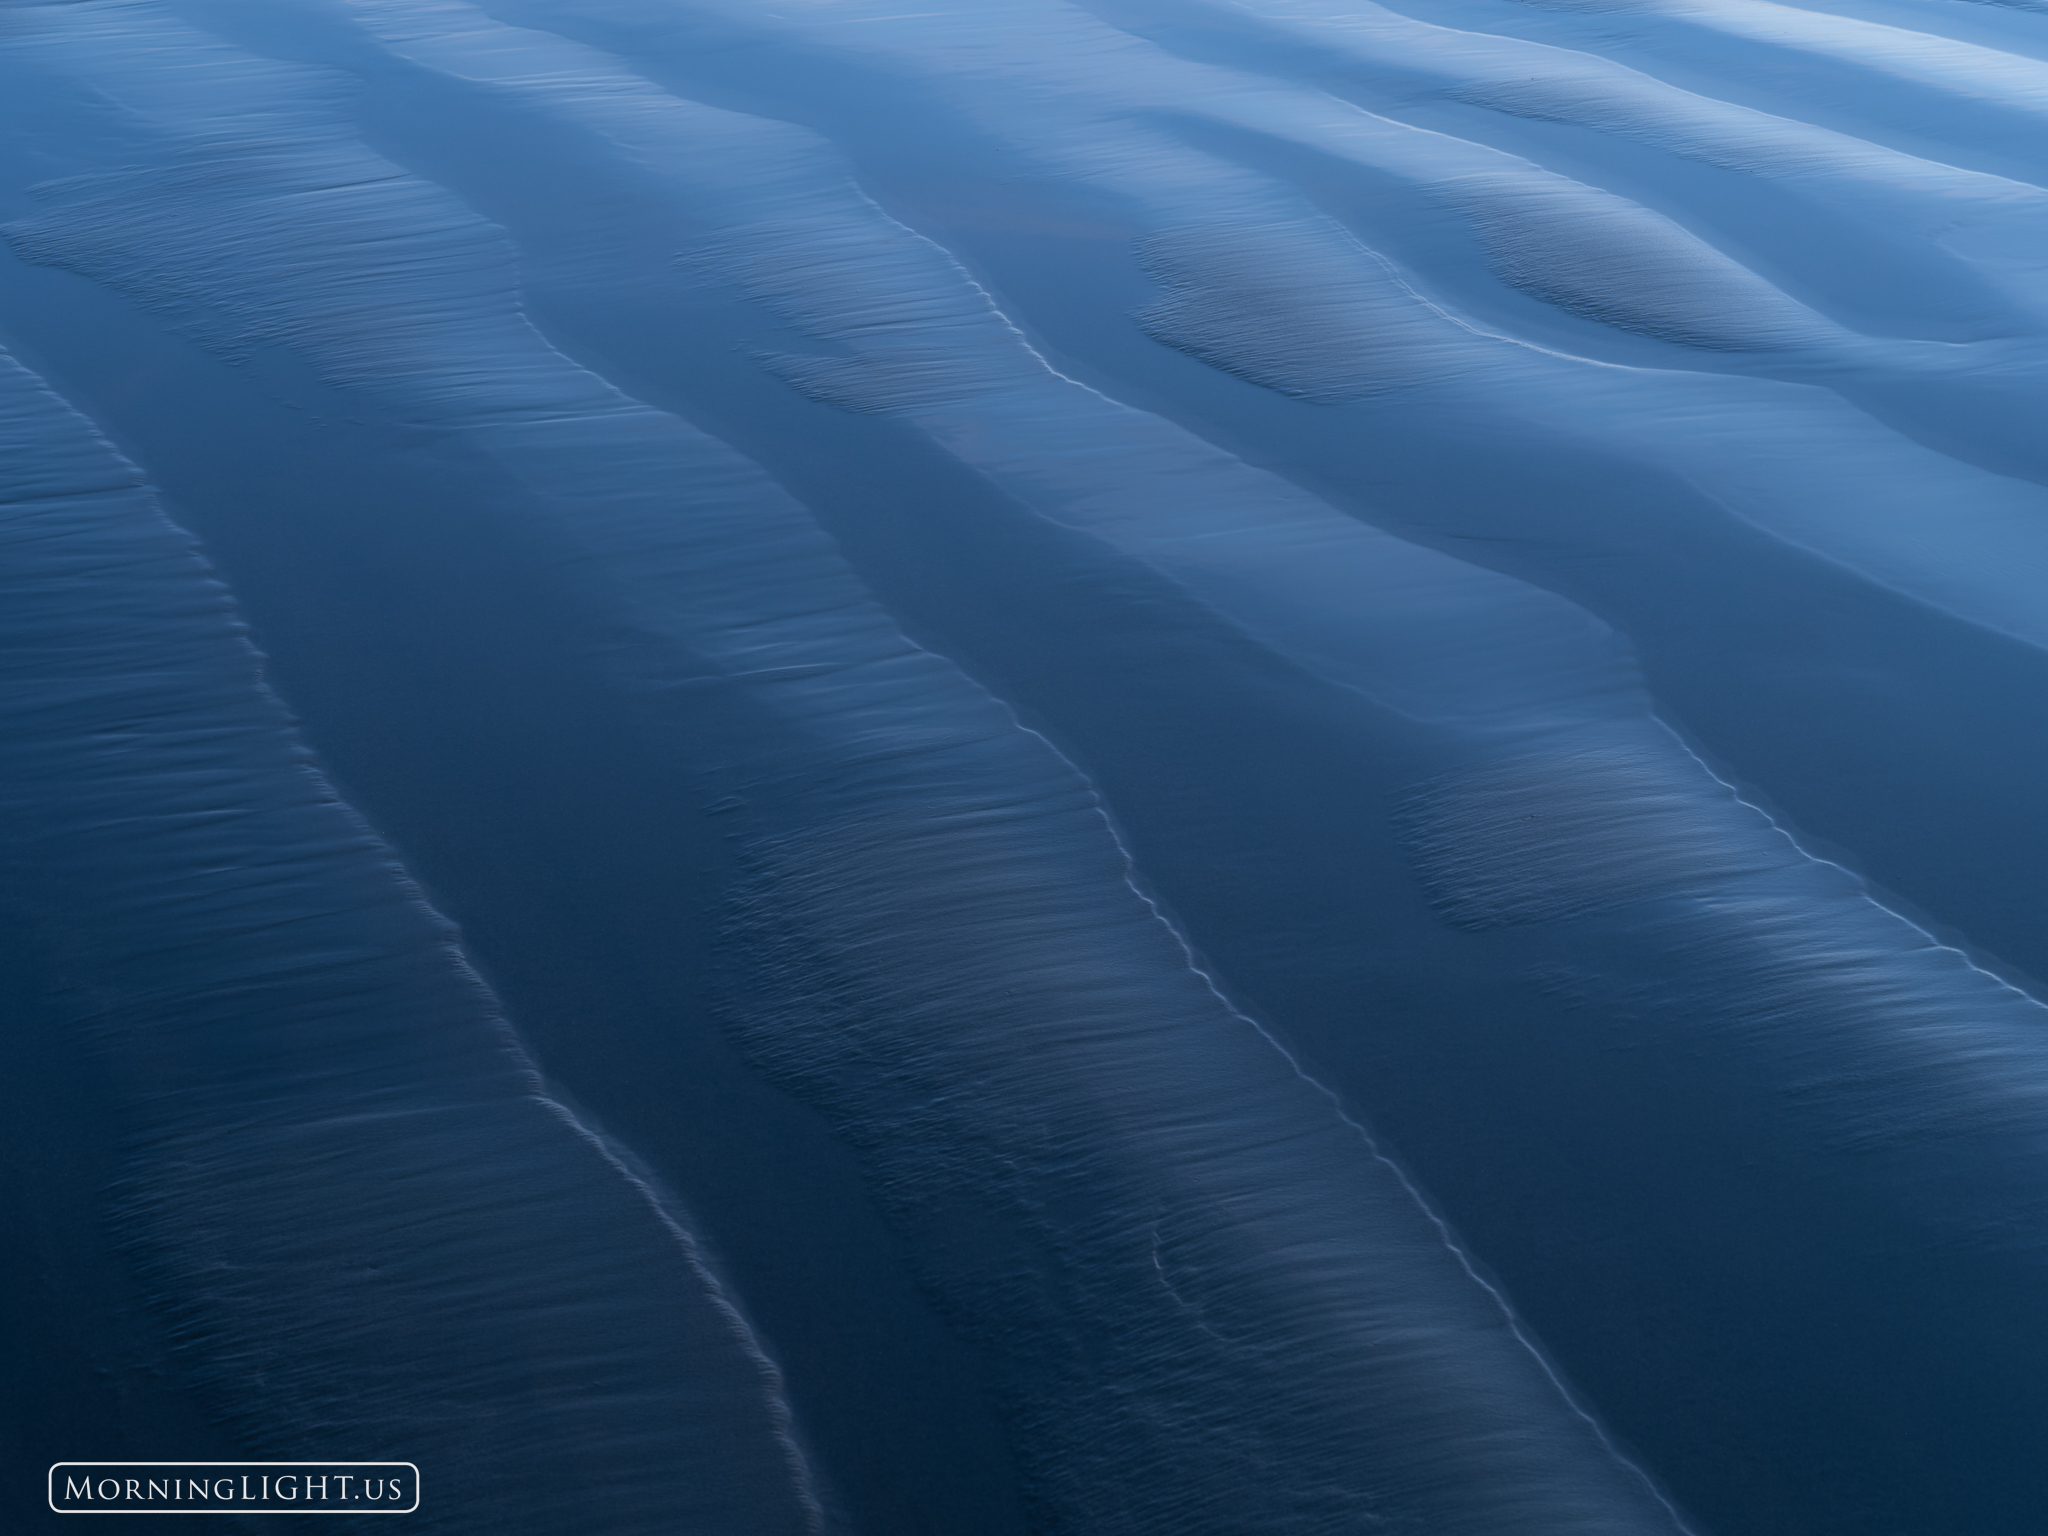 Along the beach in Morrow Bay, California, I spent an evening photographing ripples in the sand. After the sun set, the deep...